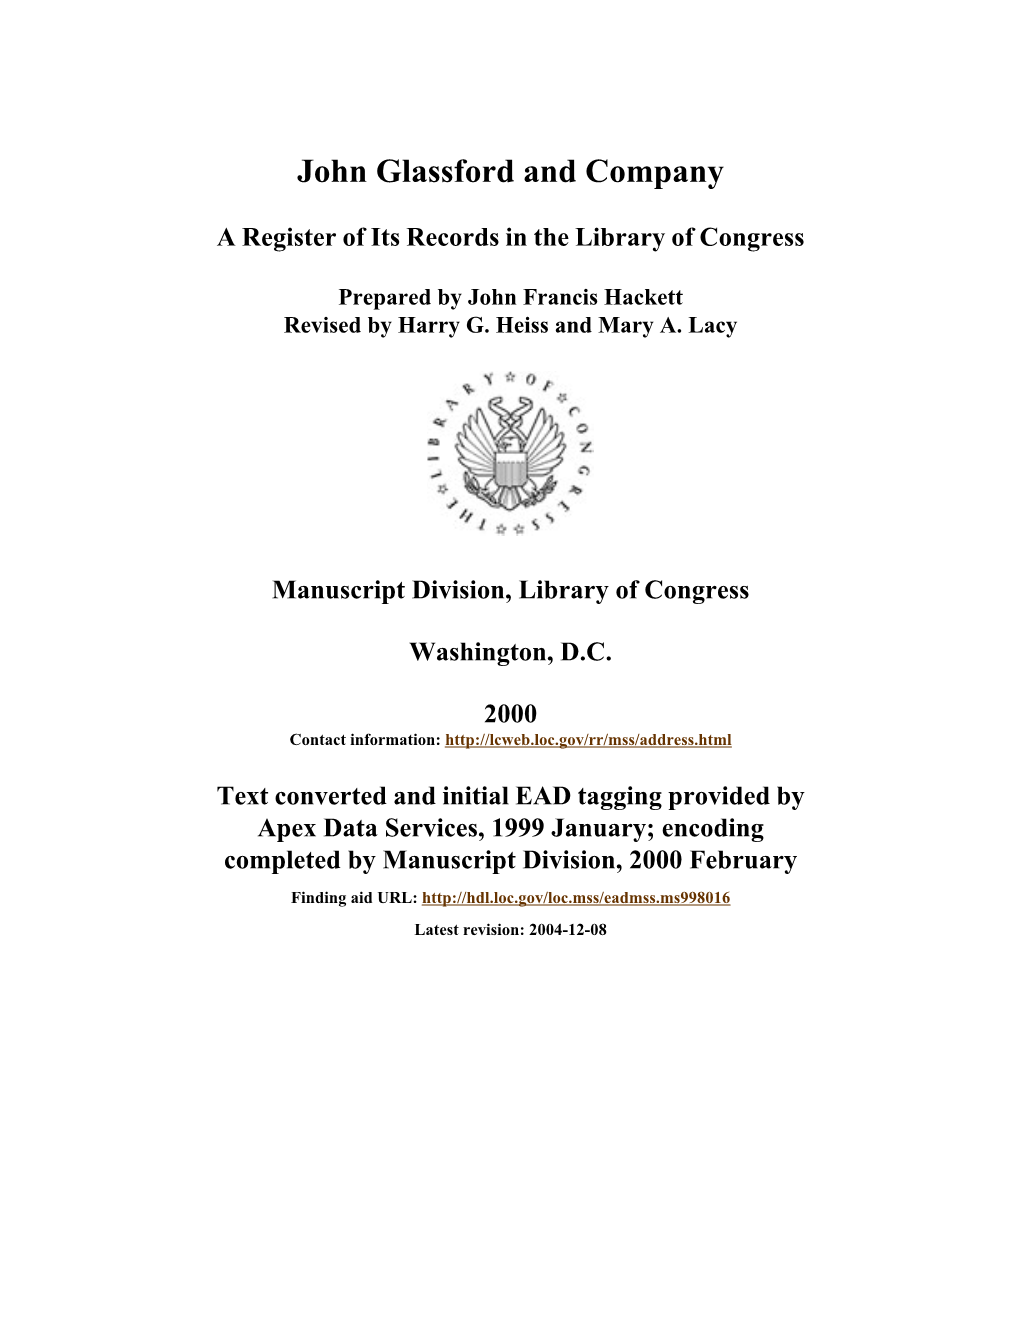 Records of John Glassford and Company